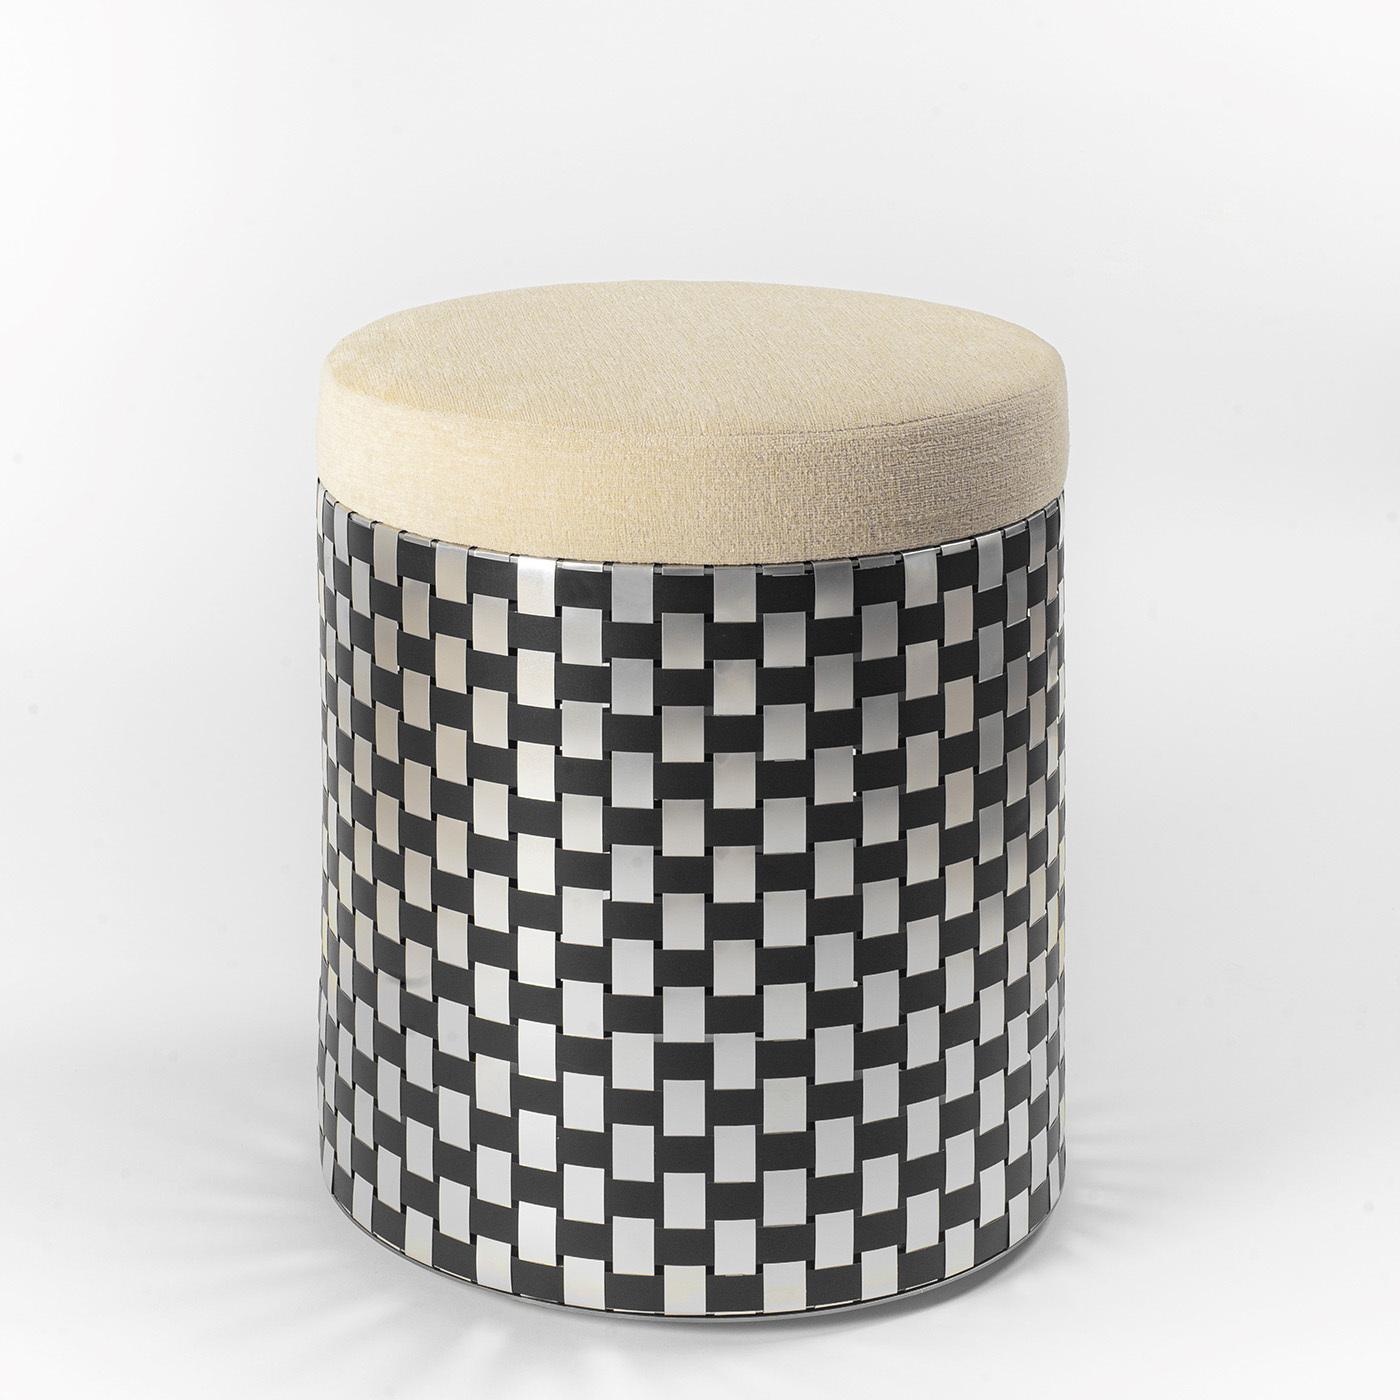 Inspired by the Optical Art movement of the 1960s, this splendid pouf flaunts a visually captivating and shimmering design fashioned by interweaving black and natural-finished aluminum slats recycled from industrial waste, a technique known as